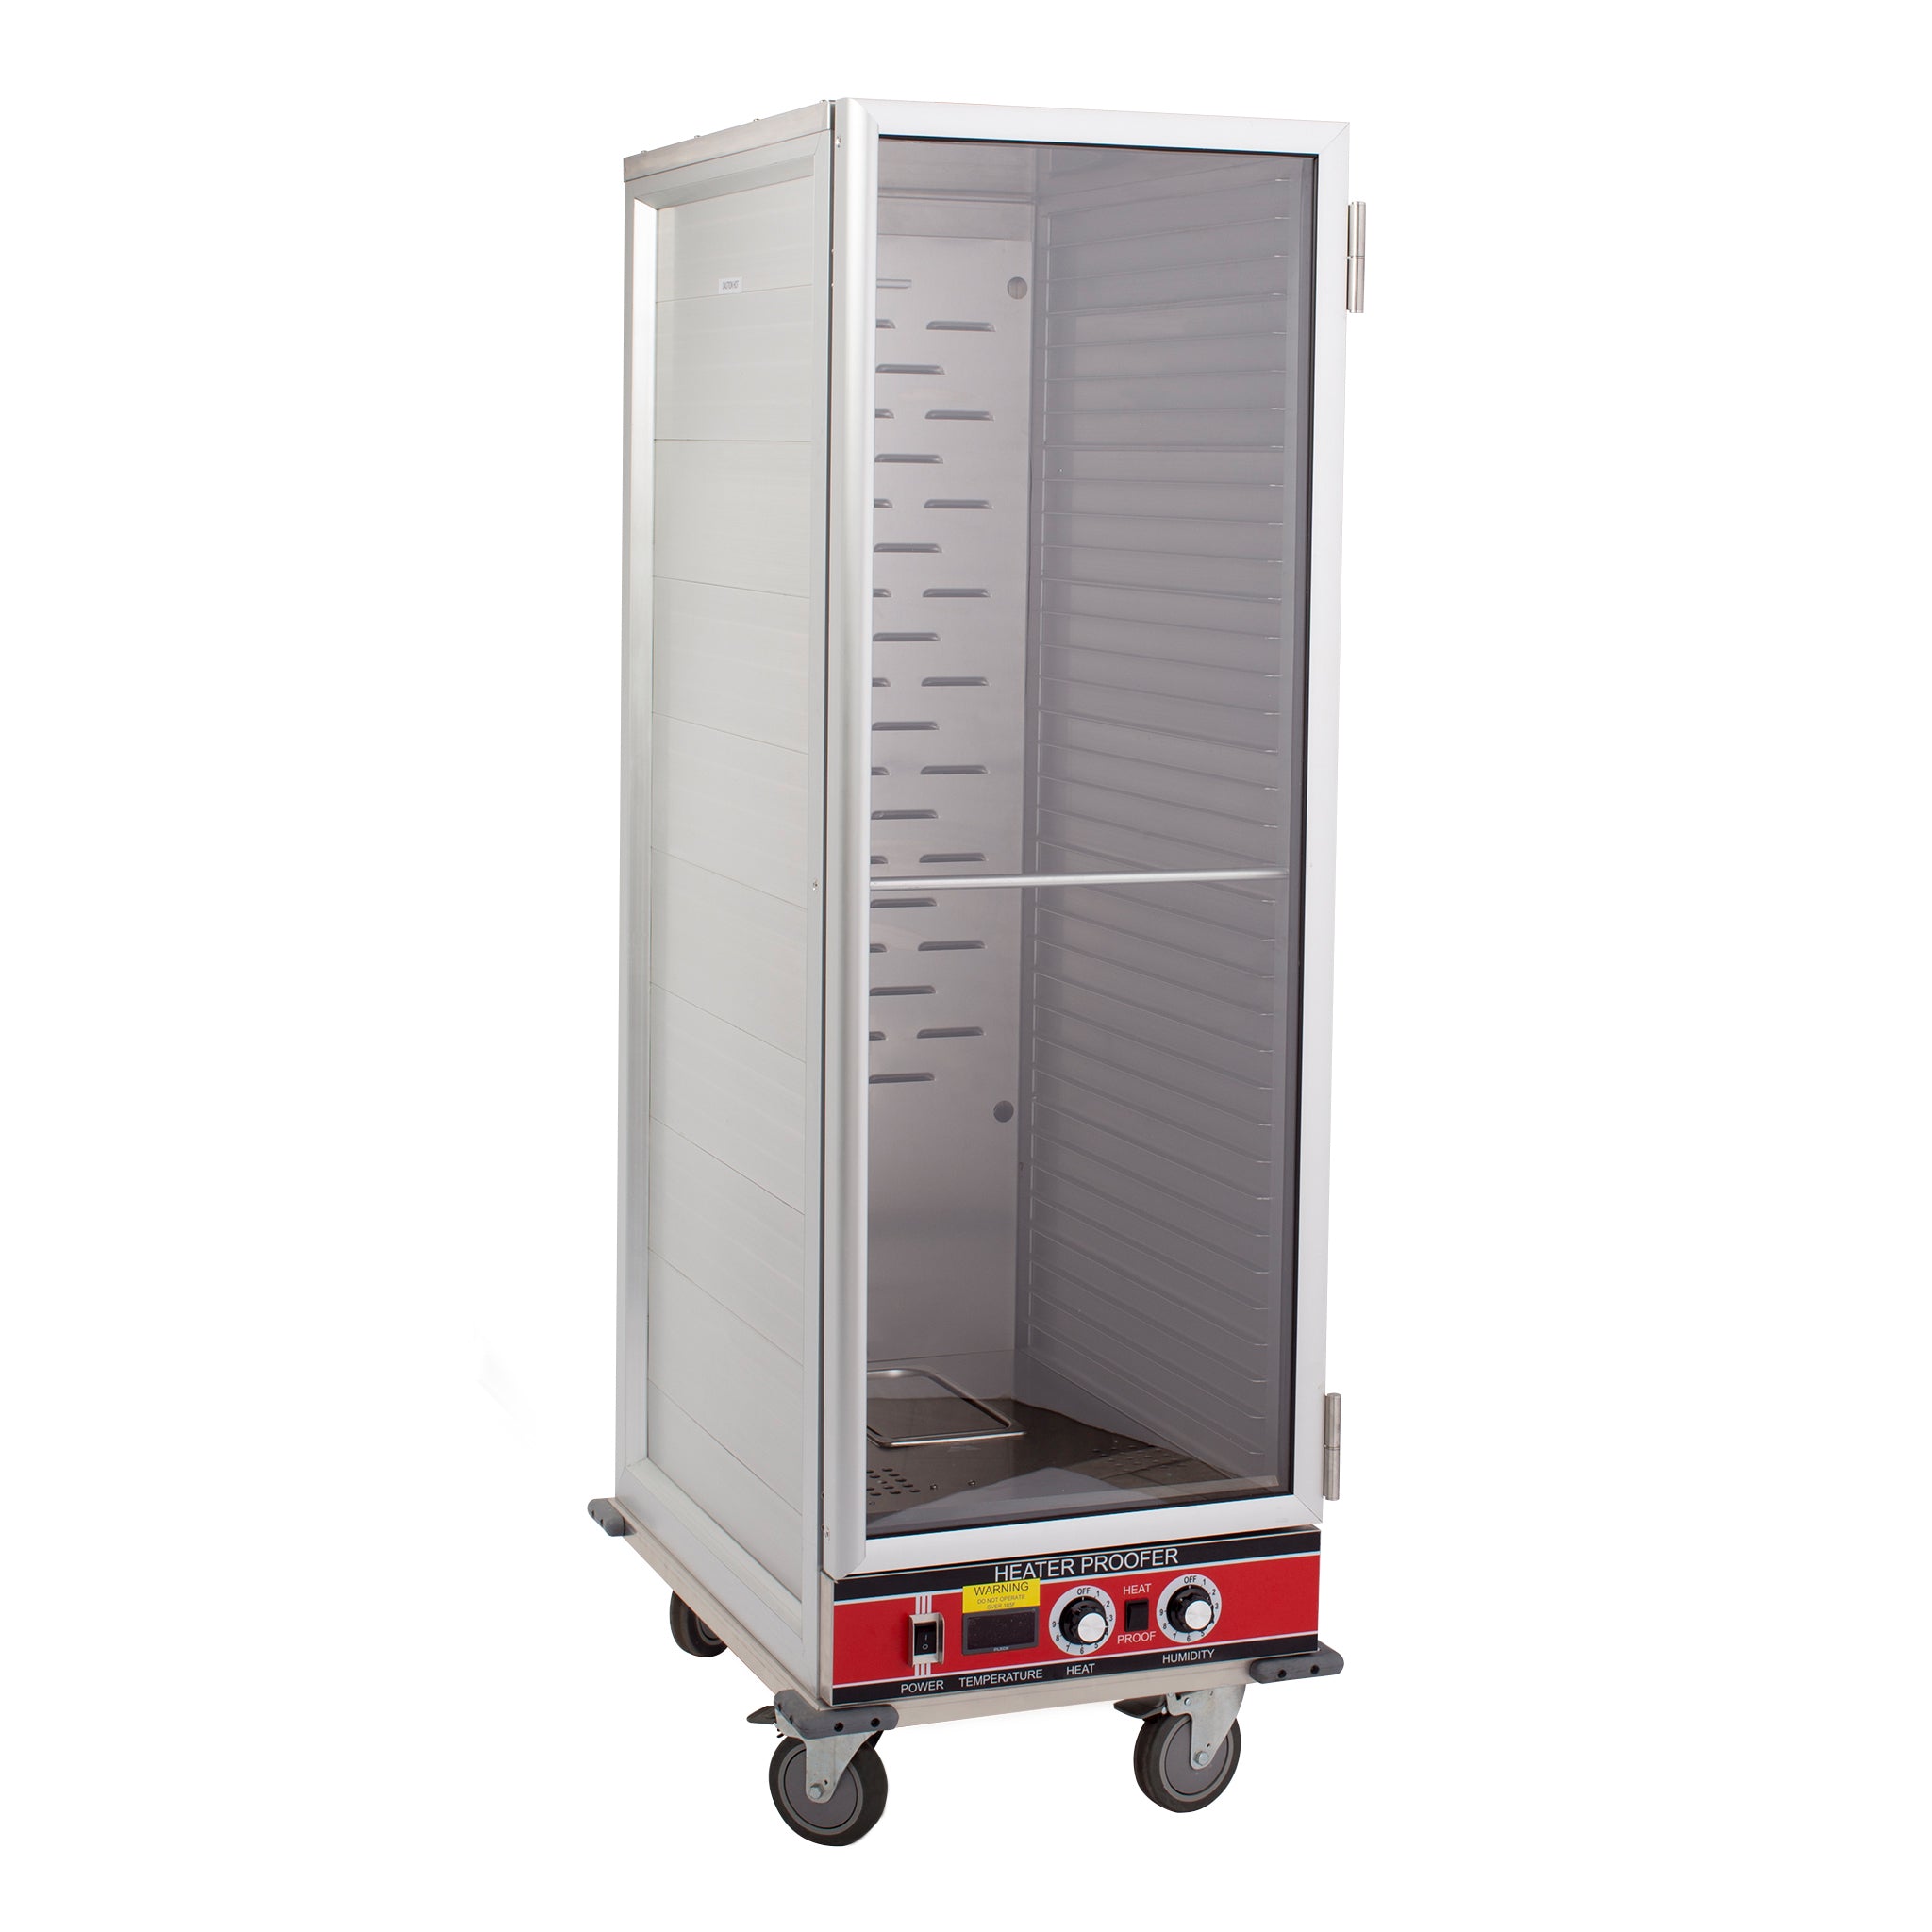 BevLes - HPC-7125-A, BevLes Full Size Non-Insulated HPC Proofing & Holding Cabinet, 1 Clear Door, Adjustable Slides, in Silver